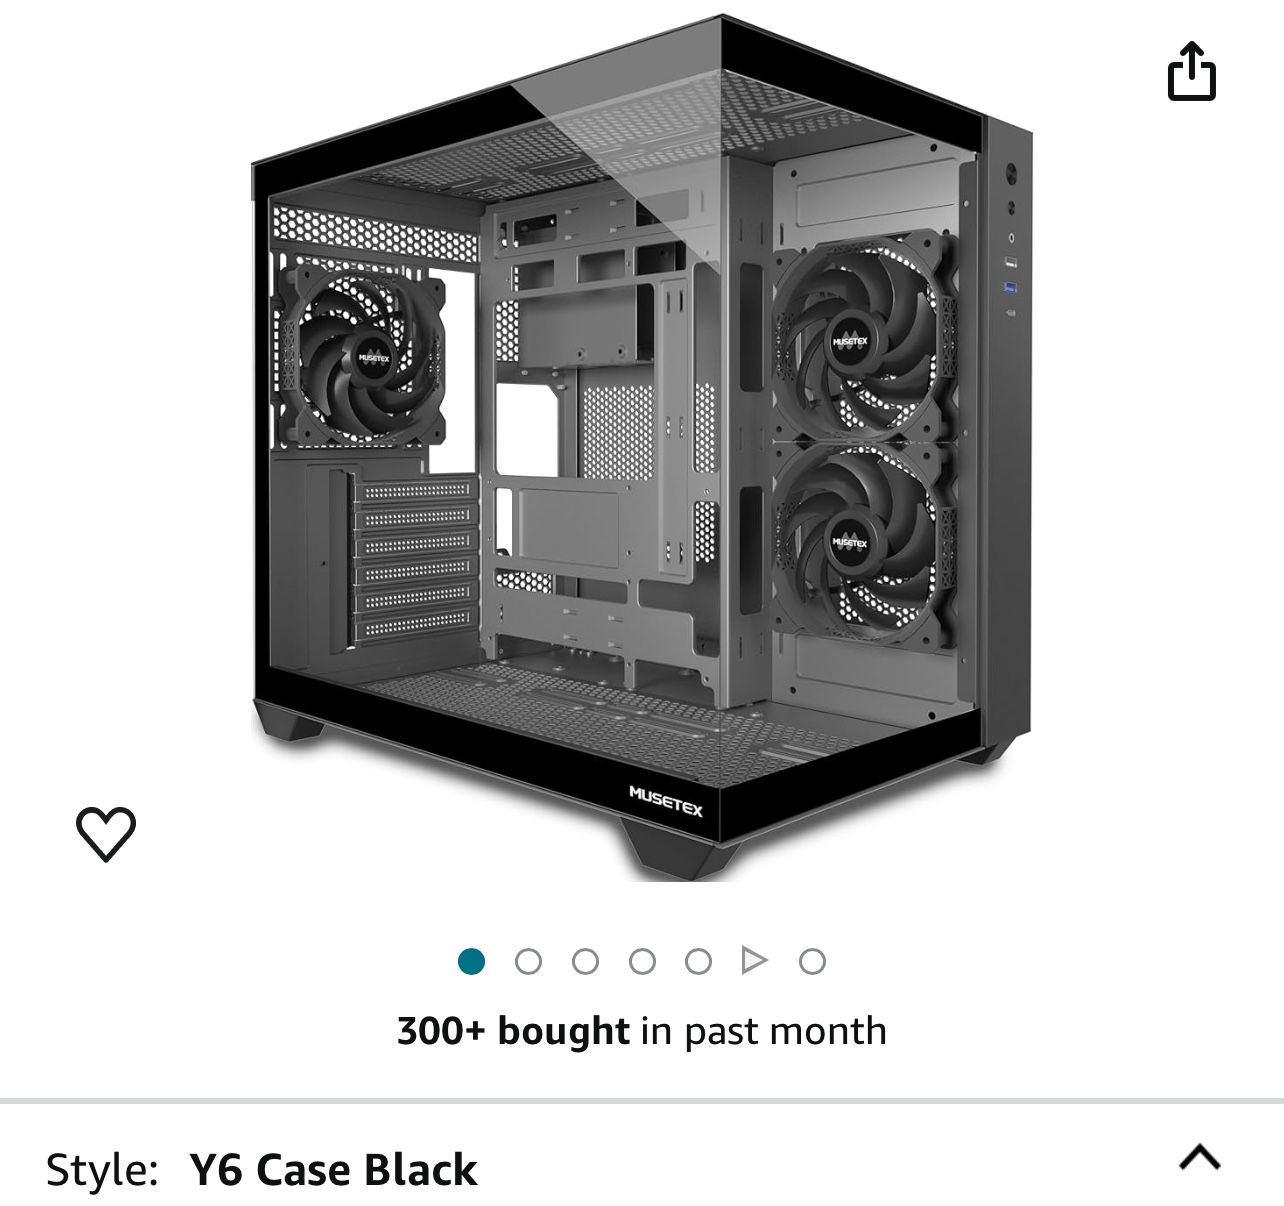 MUSETEX ATX PC Case, 3 x 120mm Fans Pre-Installed, 360MM RAD Support, 270° Full View Tempered Glass Gaming PC Case with Type-C, Mid Tower ATX Computer